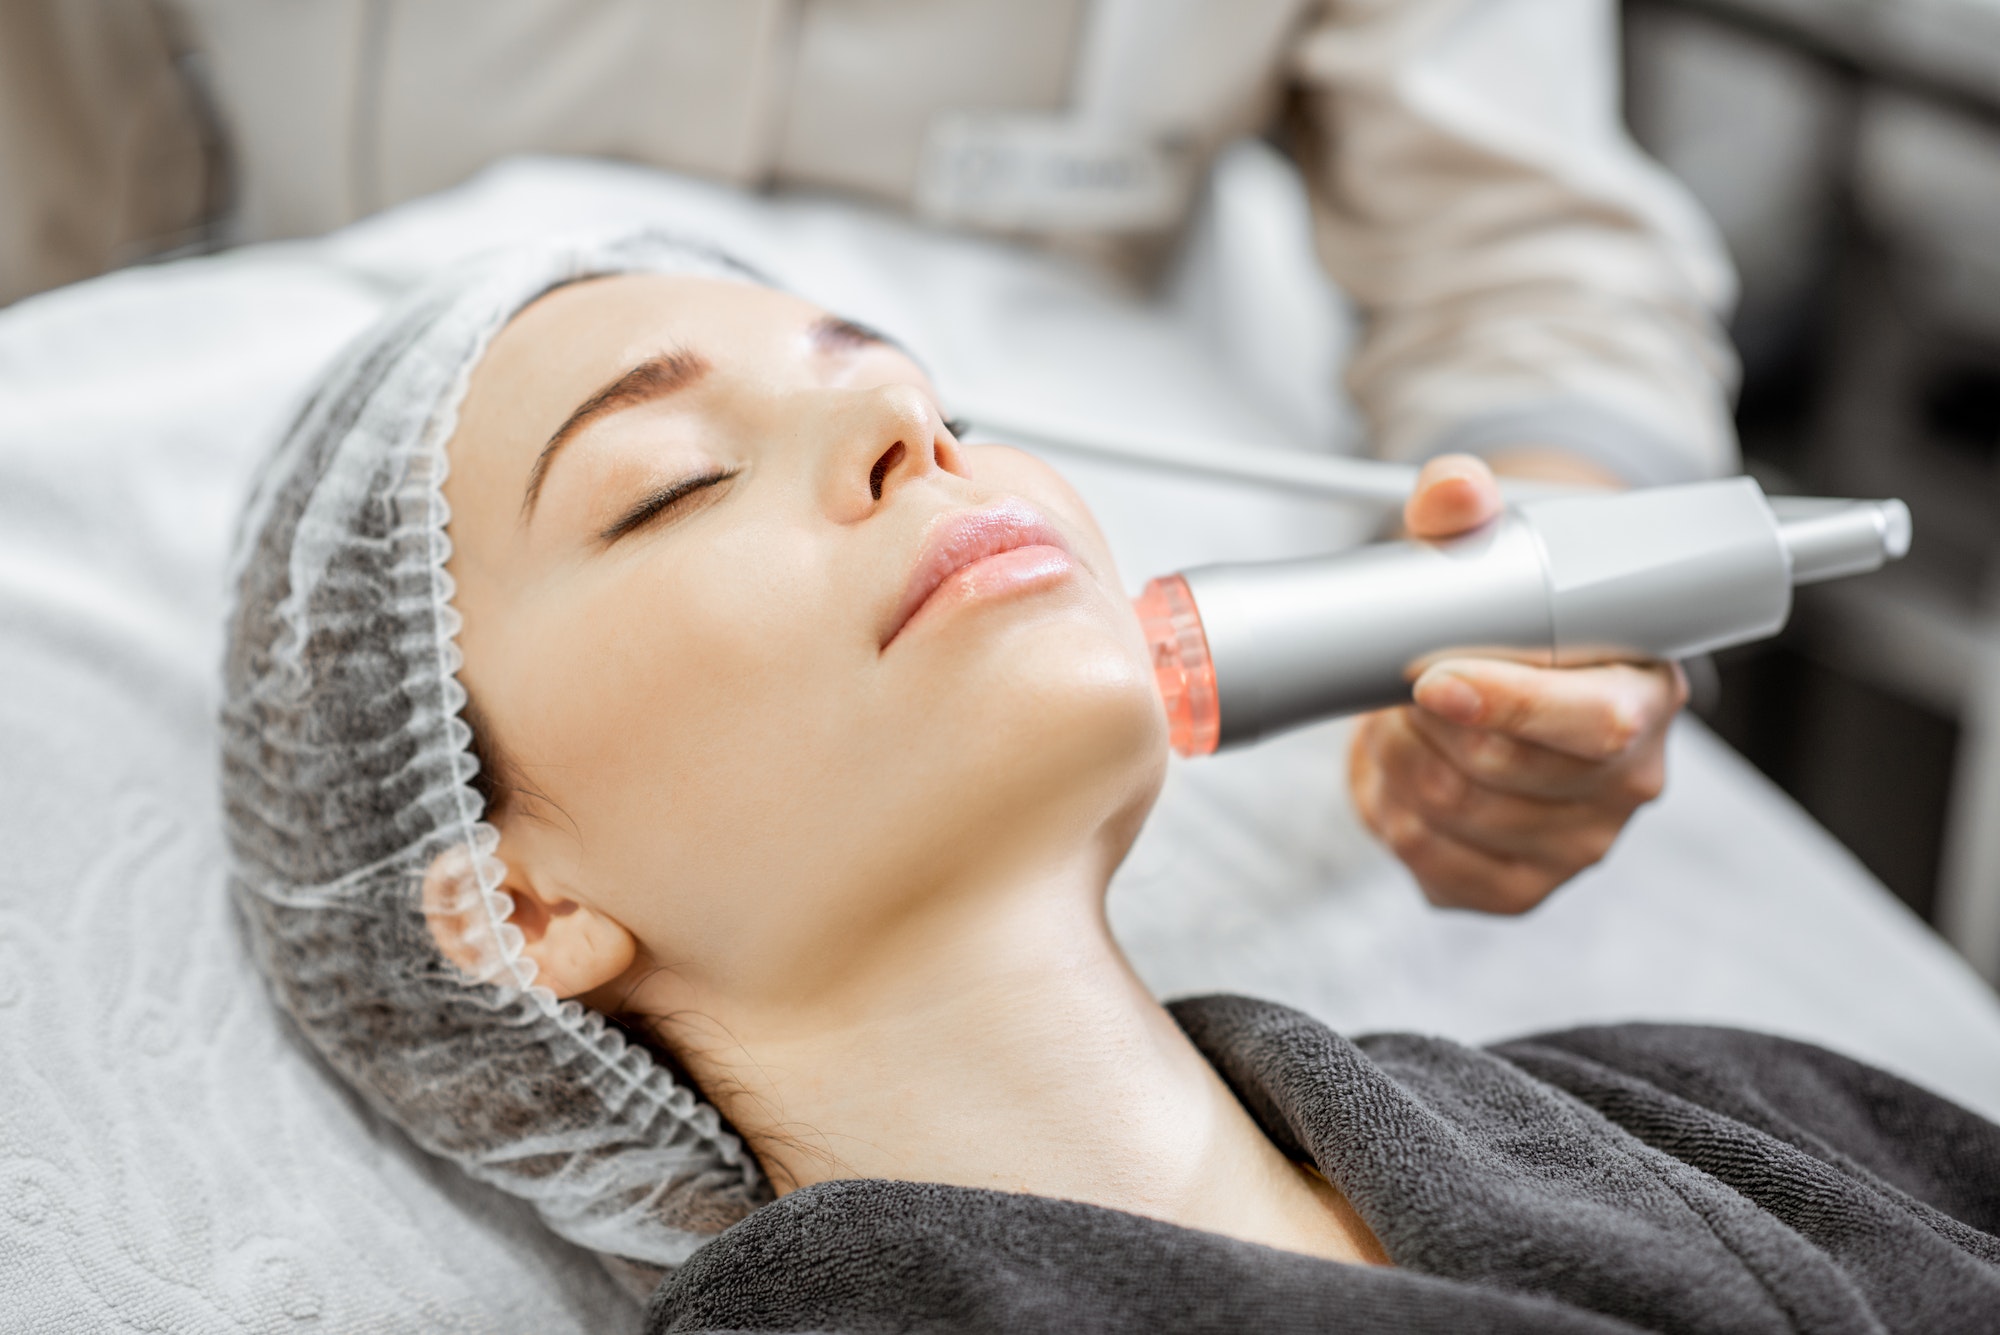 Woman during the facial treatment at the beauty salon